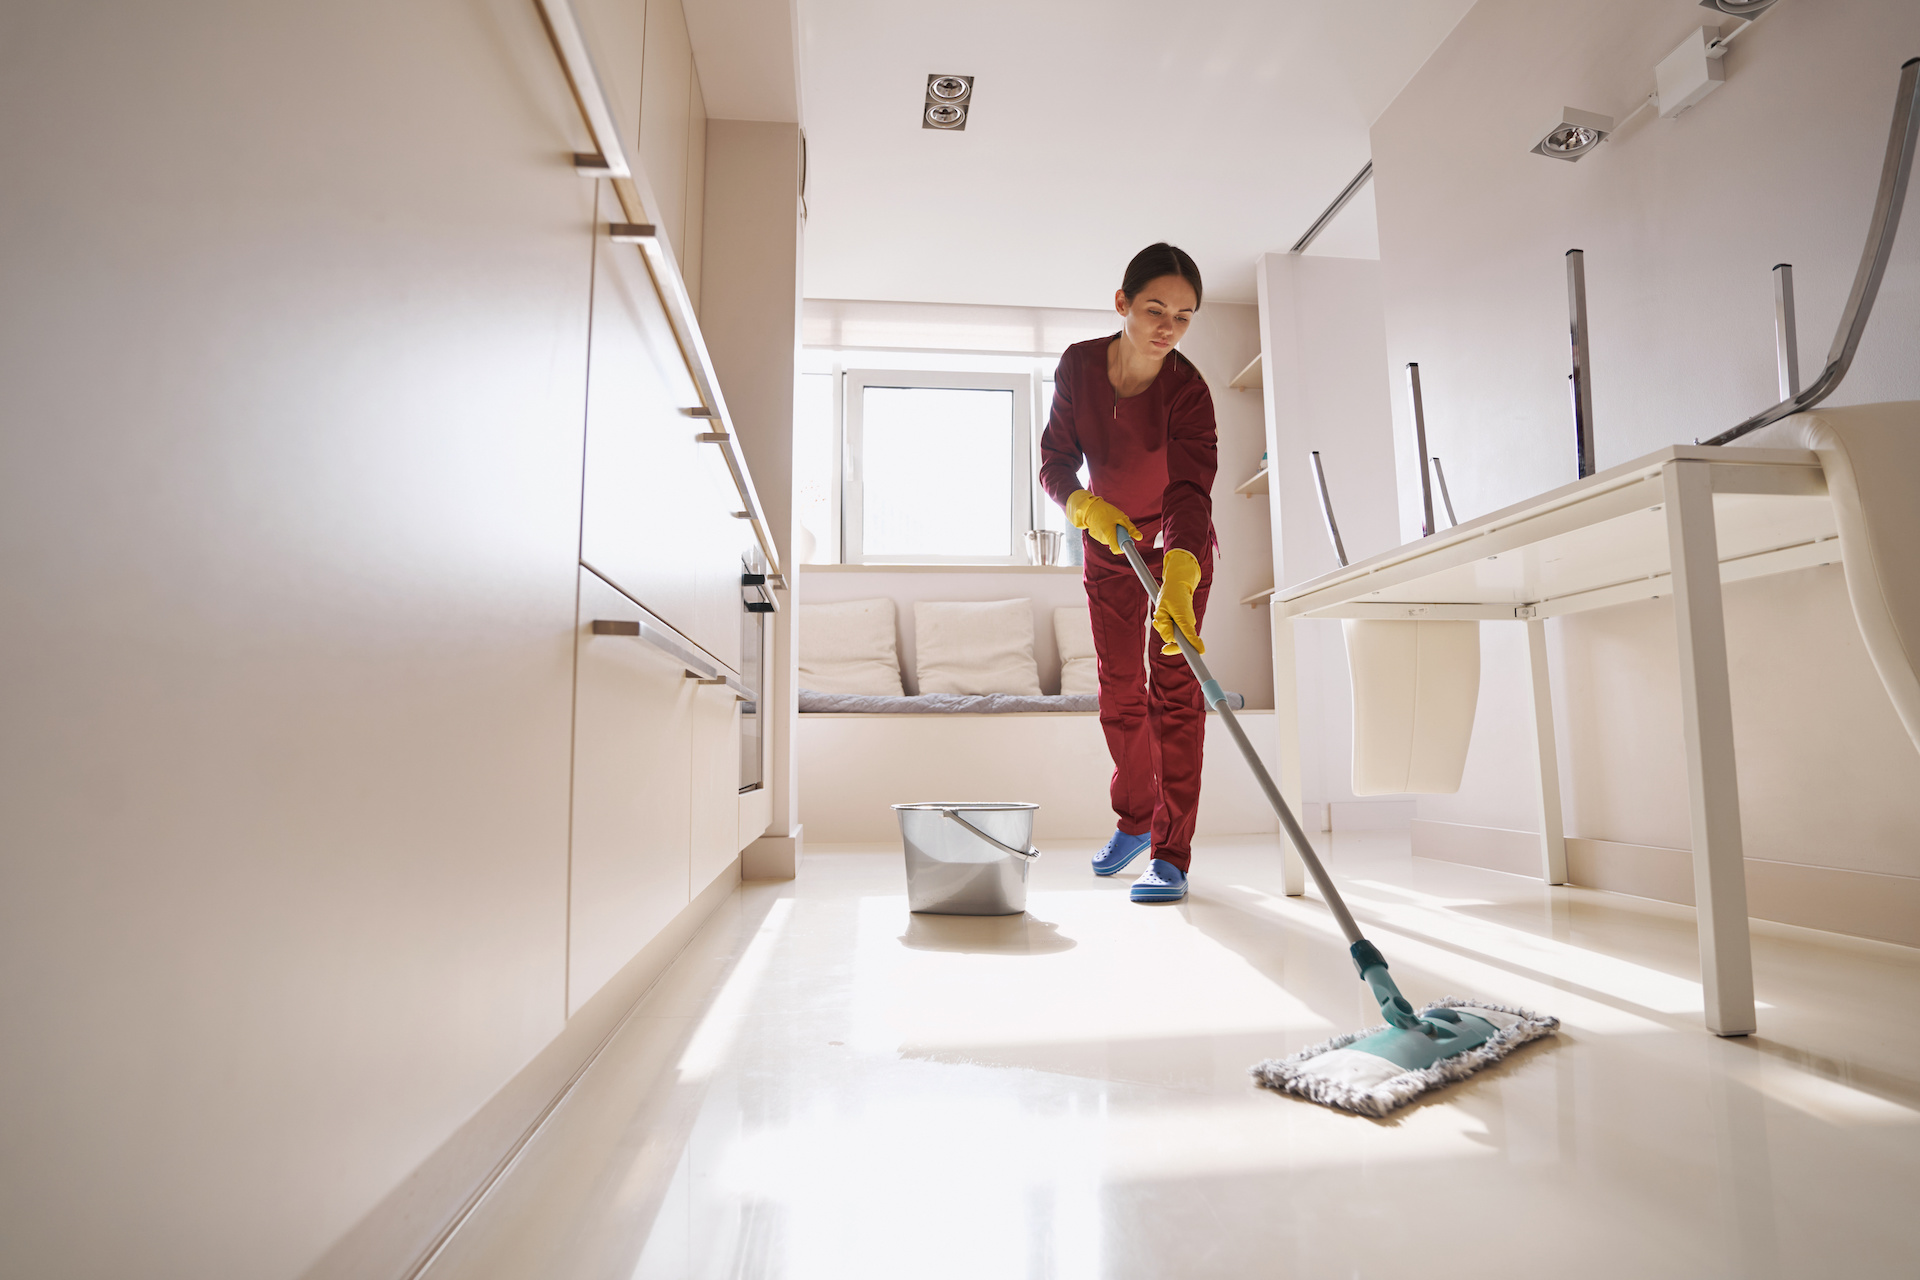 Janitorial services: a concentrated uniformed professional janitor doing wet cleaning